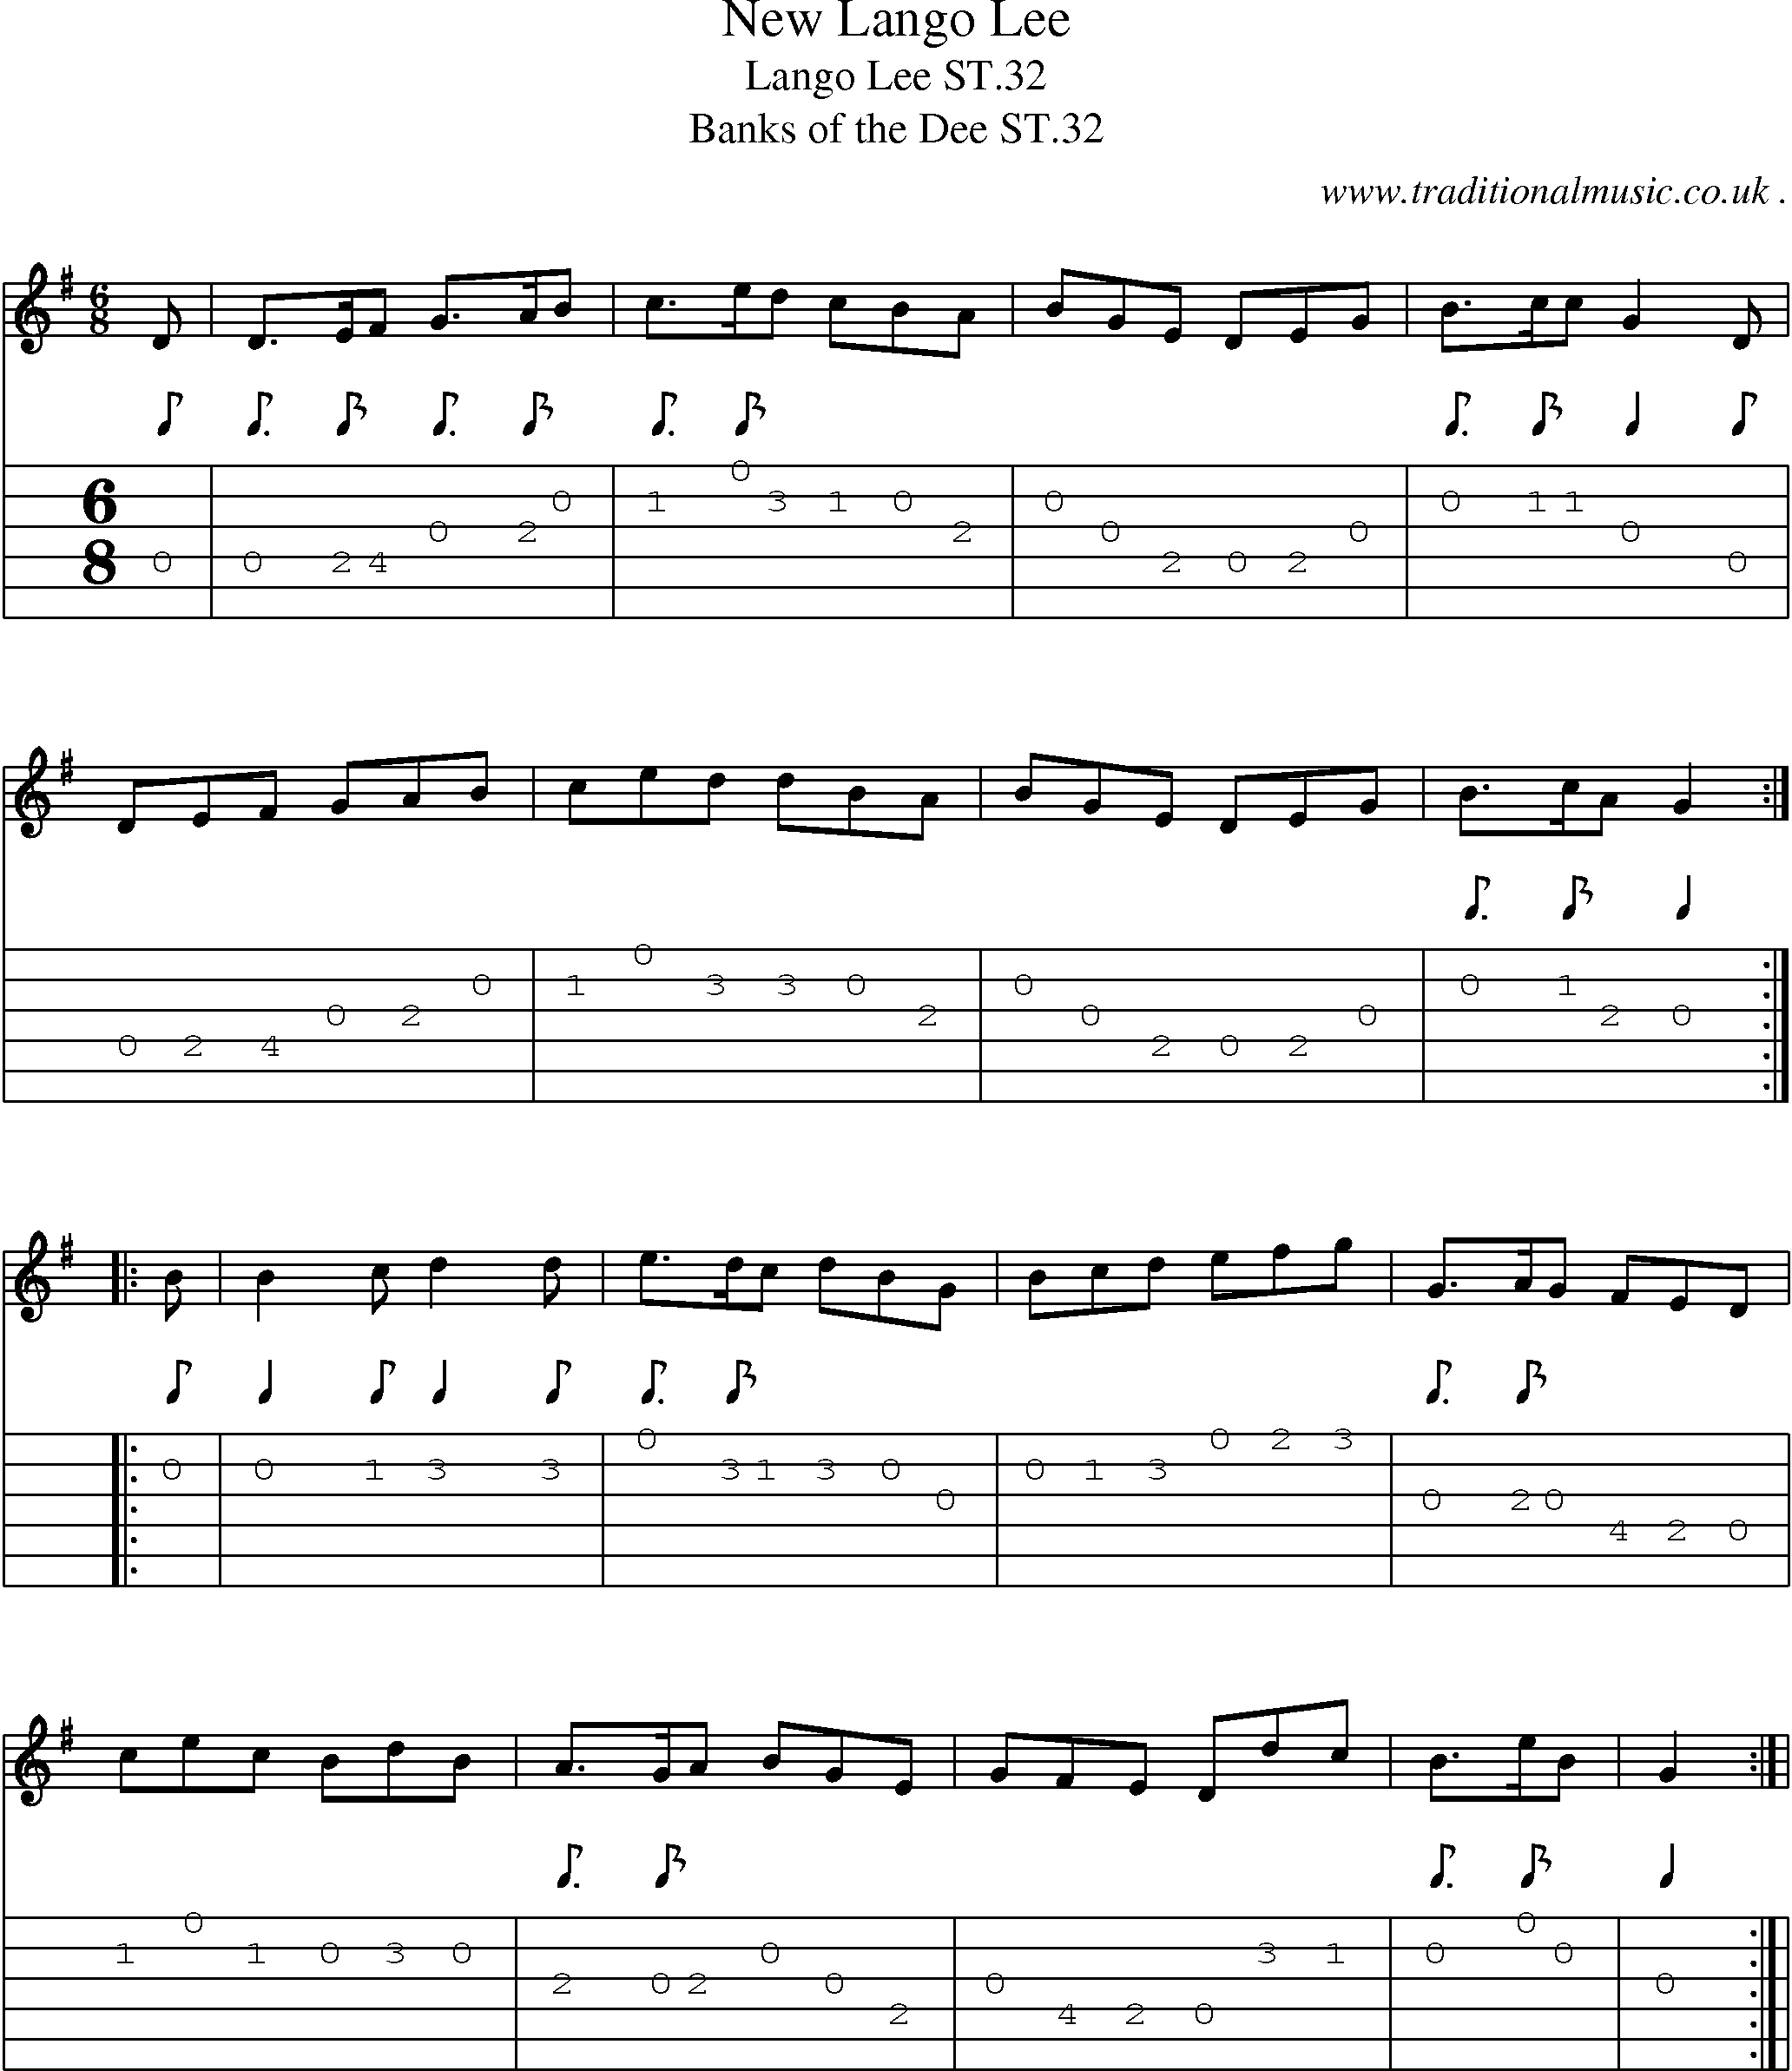 Sheet-Music and Guitar Tabs for New Lango Lee